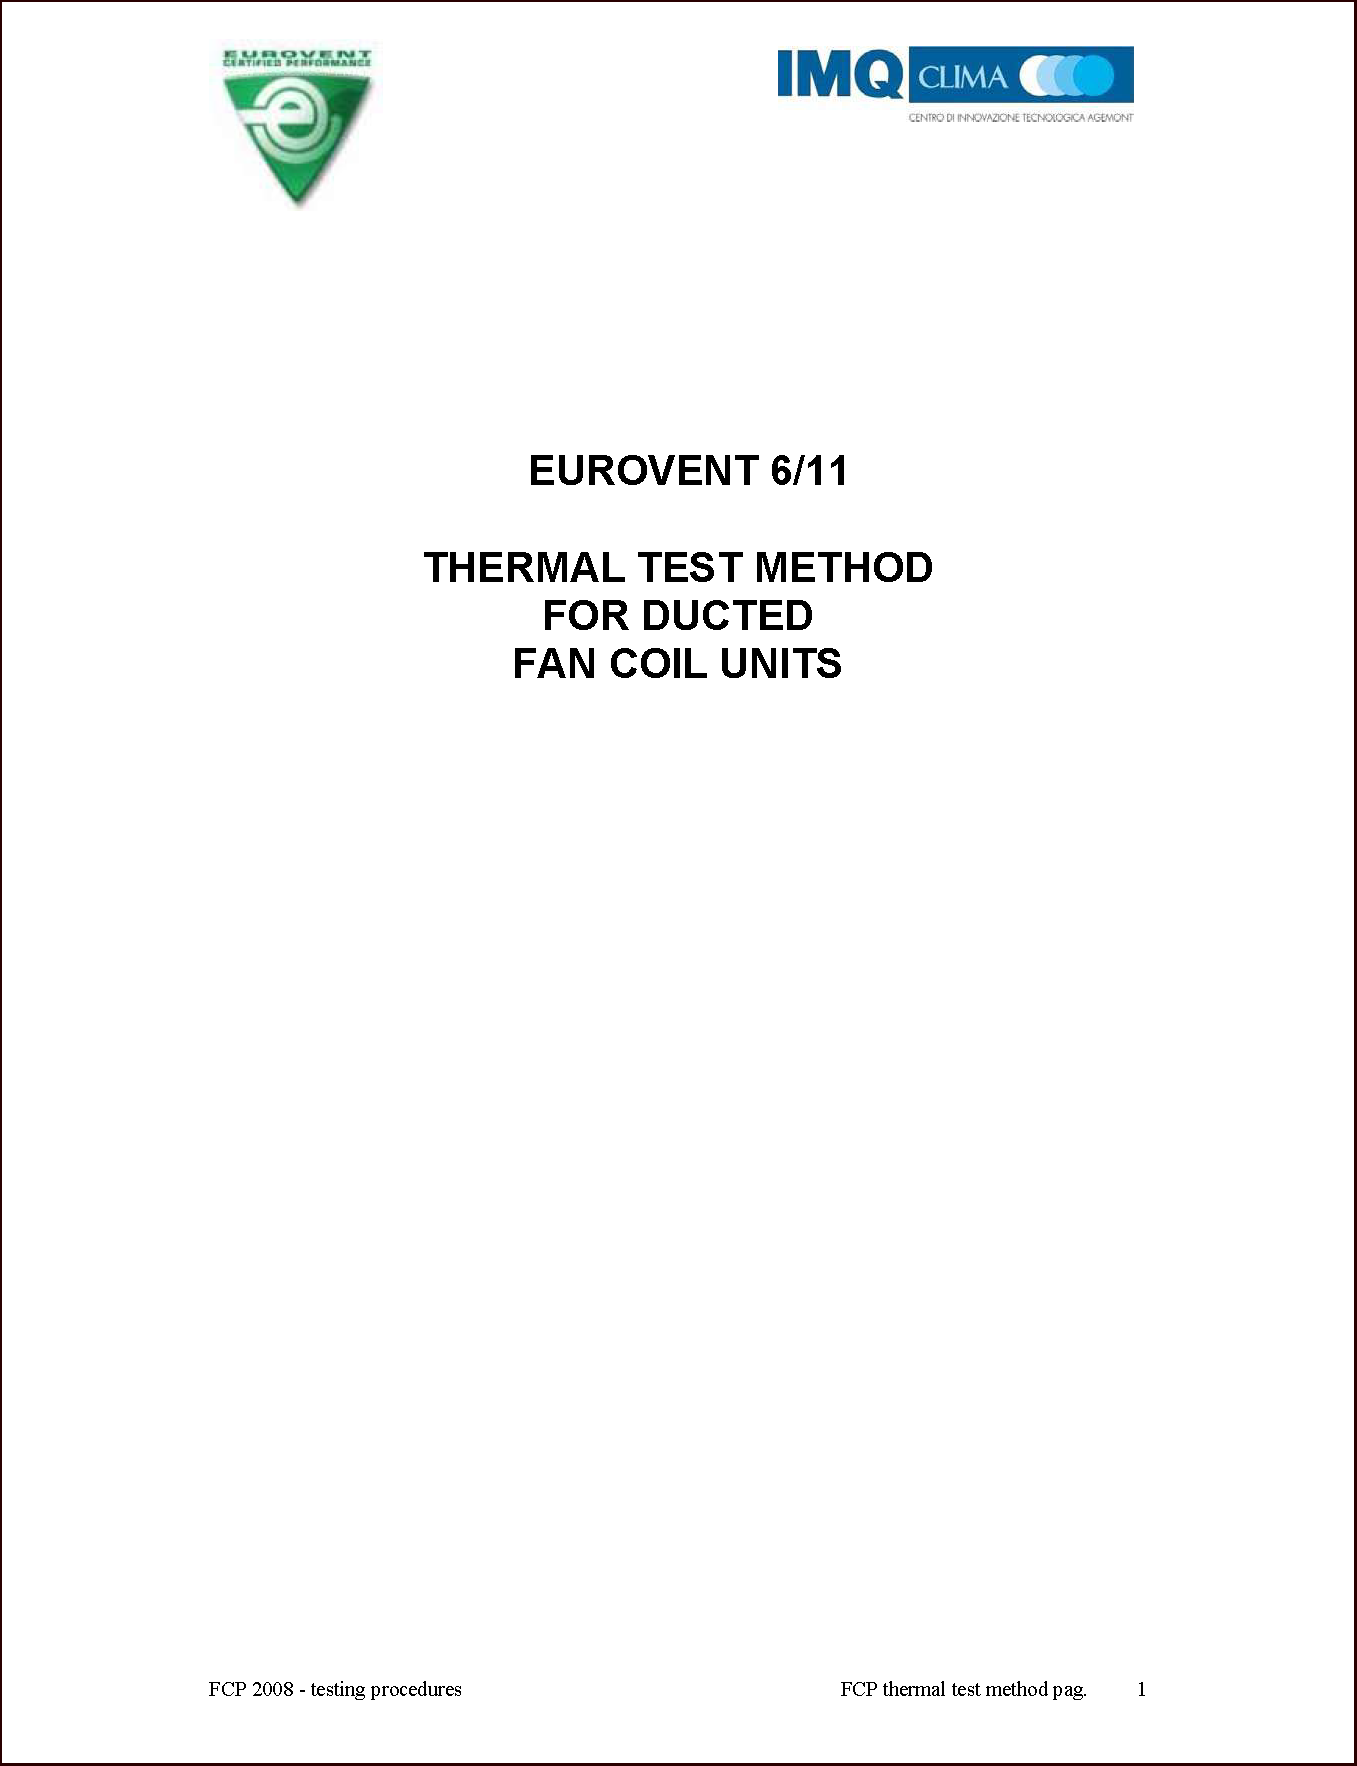 2008 - Thermal test method for ducted fan coil units